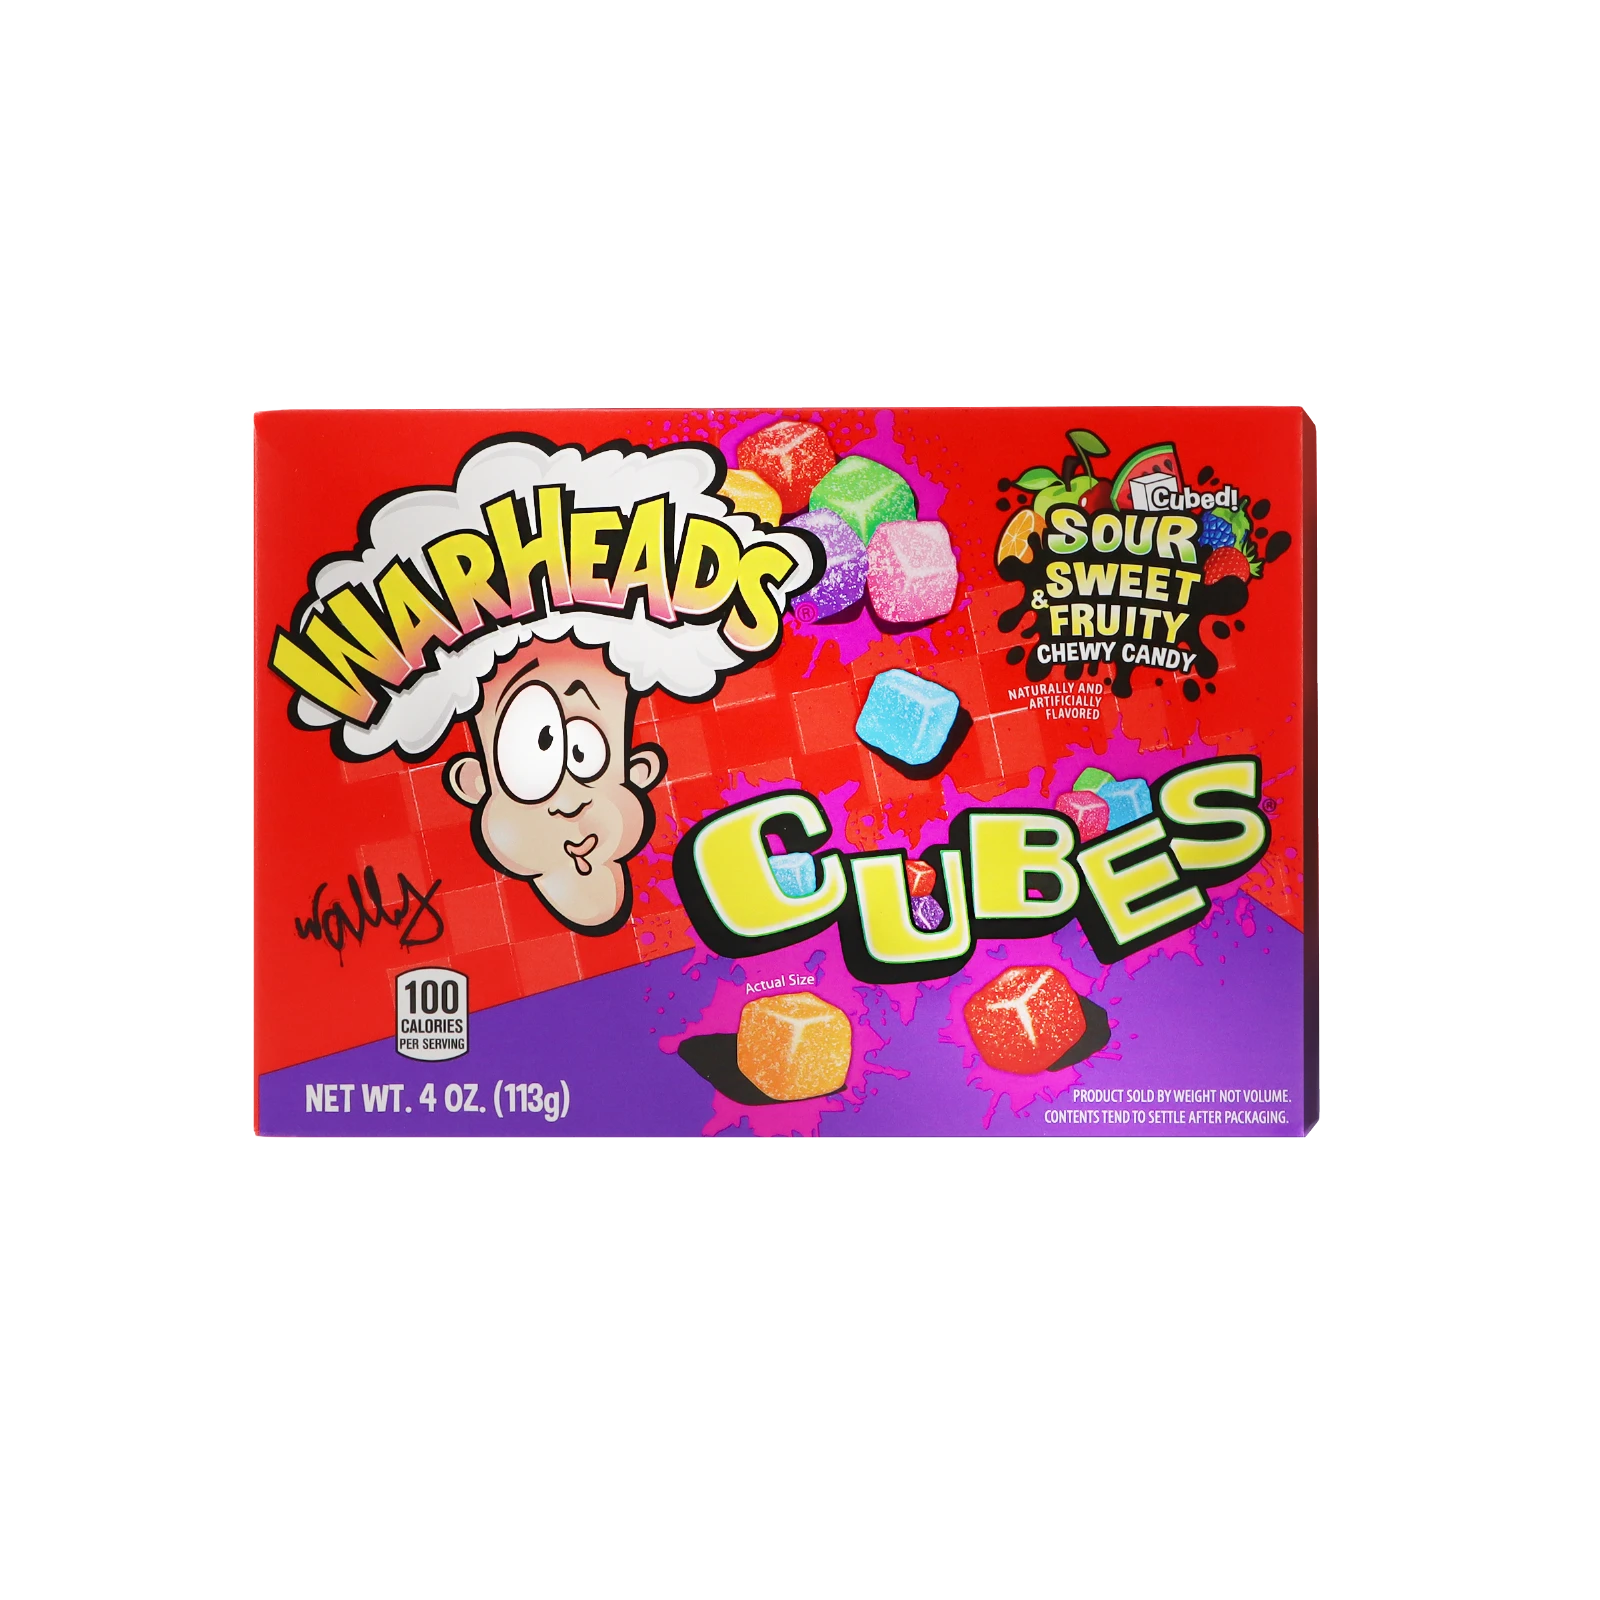 Warheads - Nerds - Chewy Cubes - 113 g